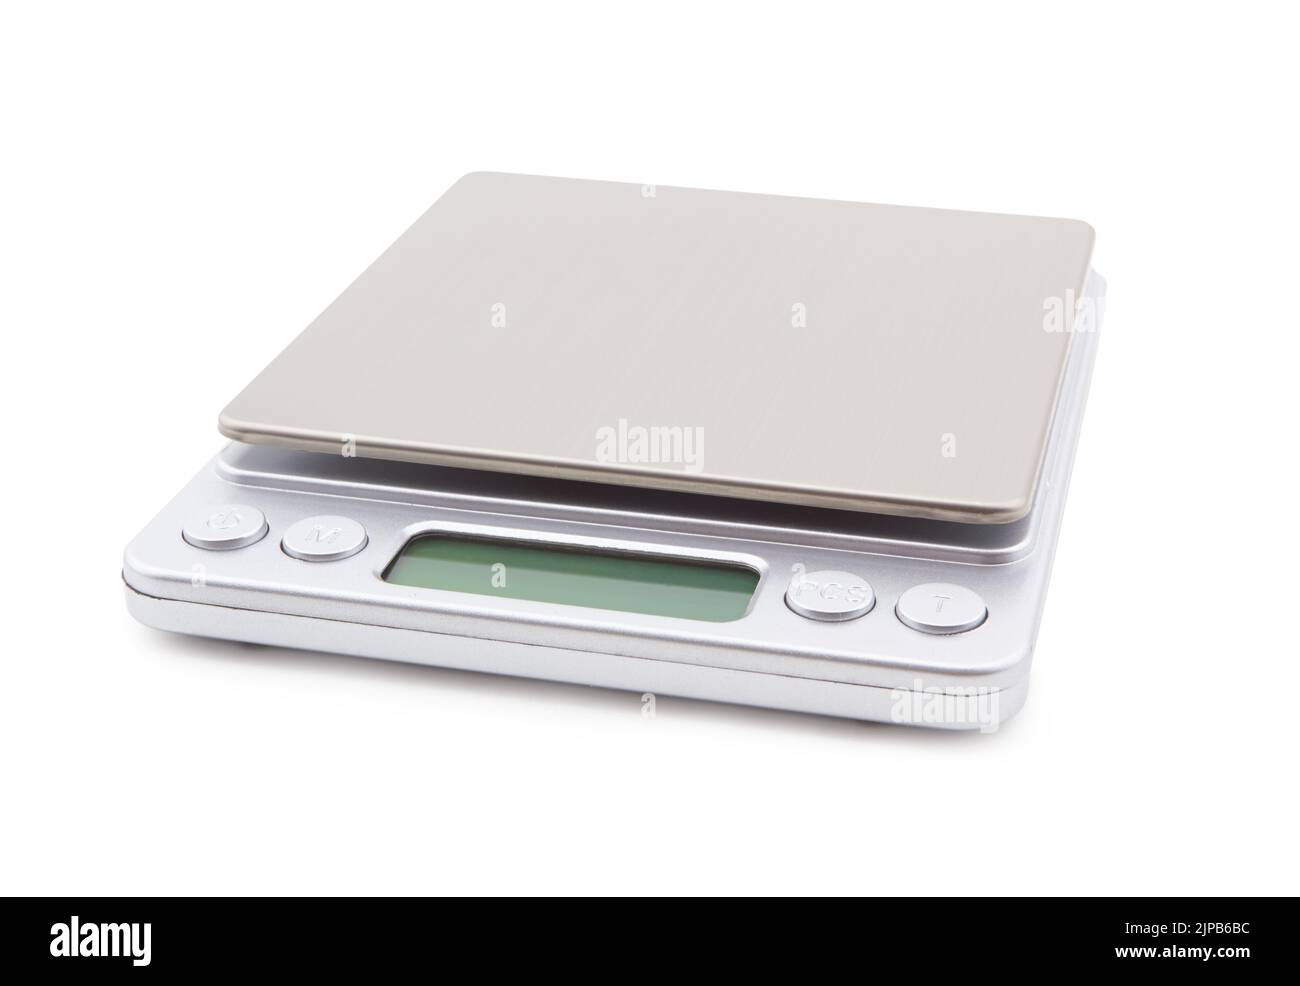 Portable electronic scale isolated on a white background Stock Photo